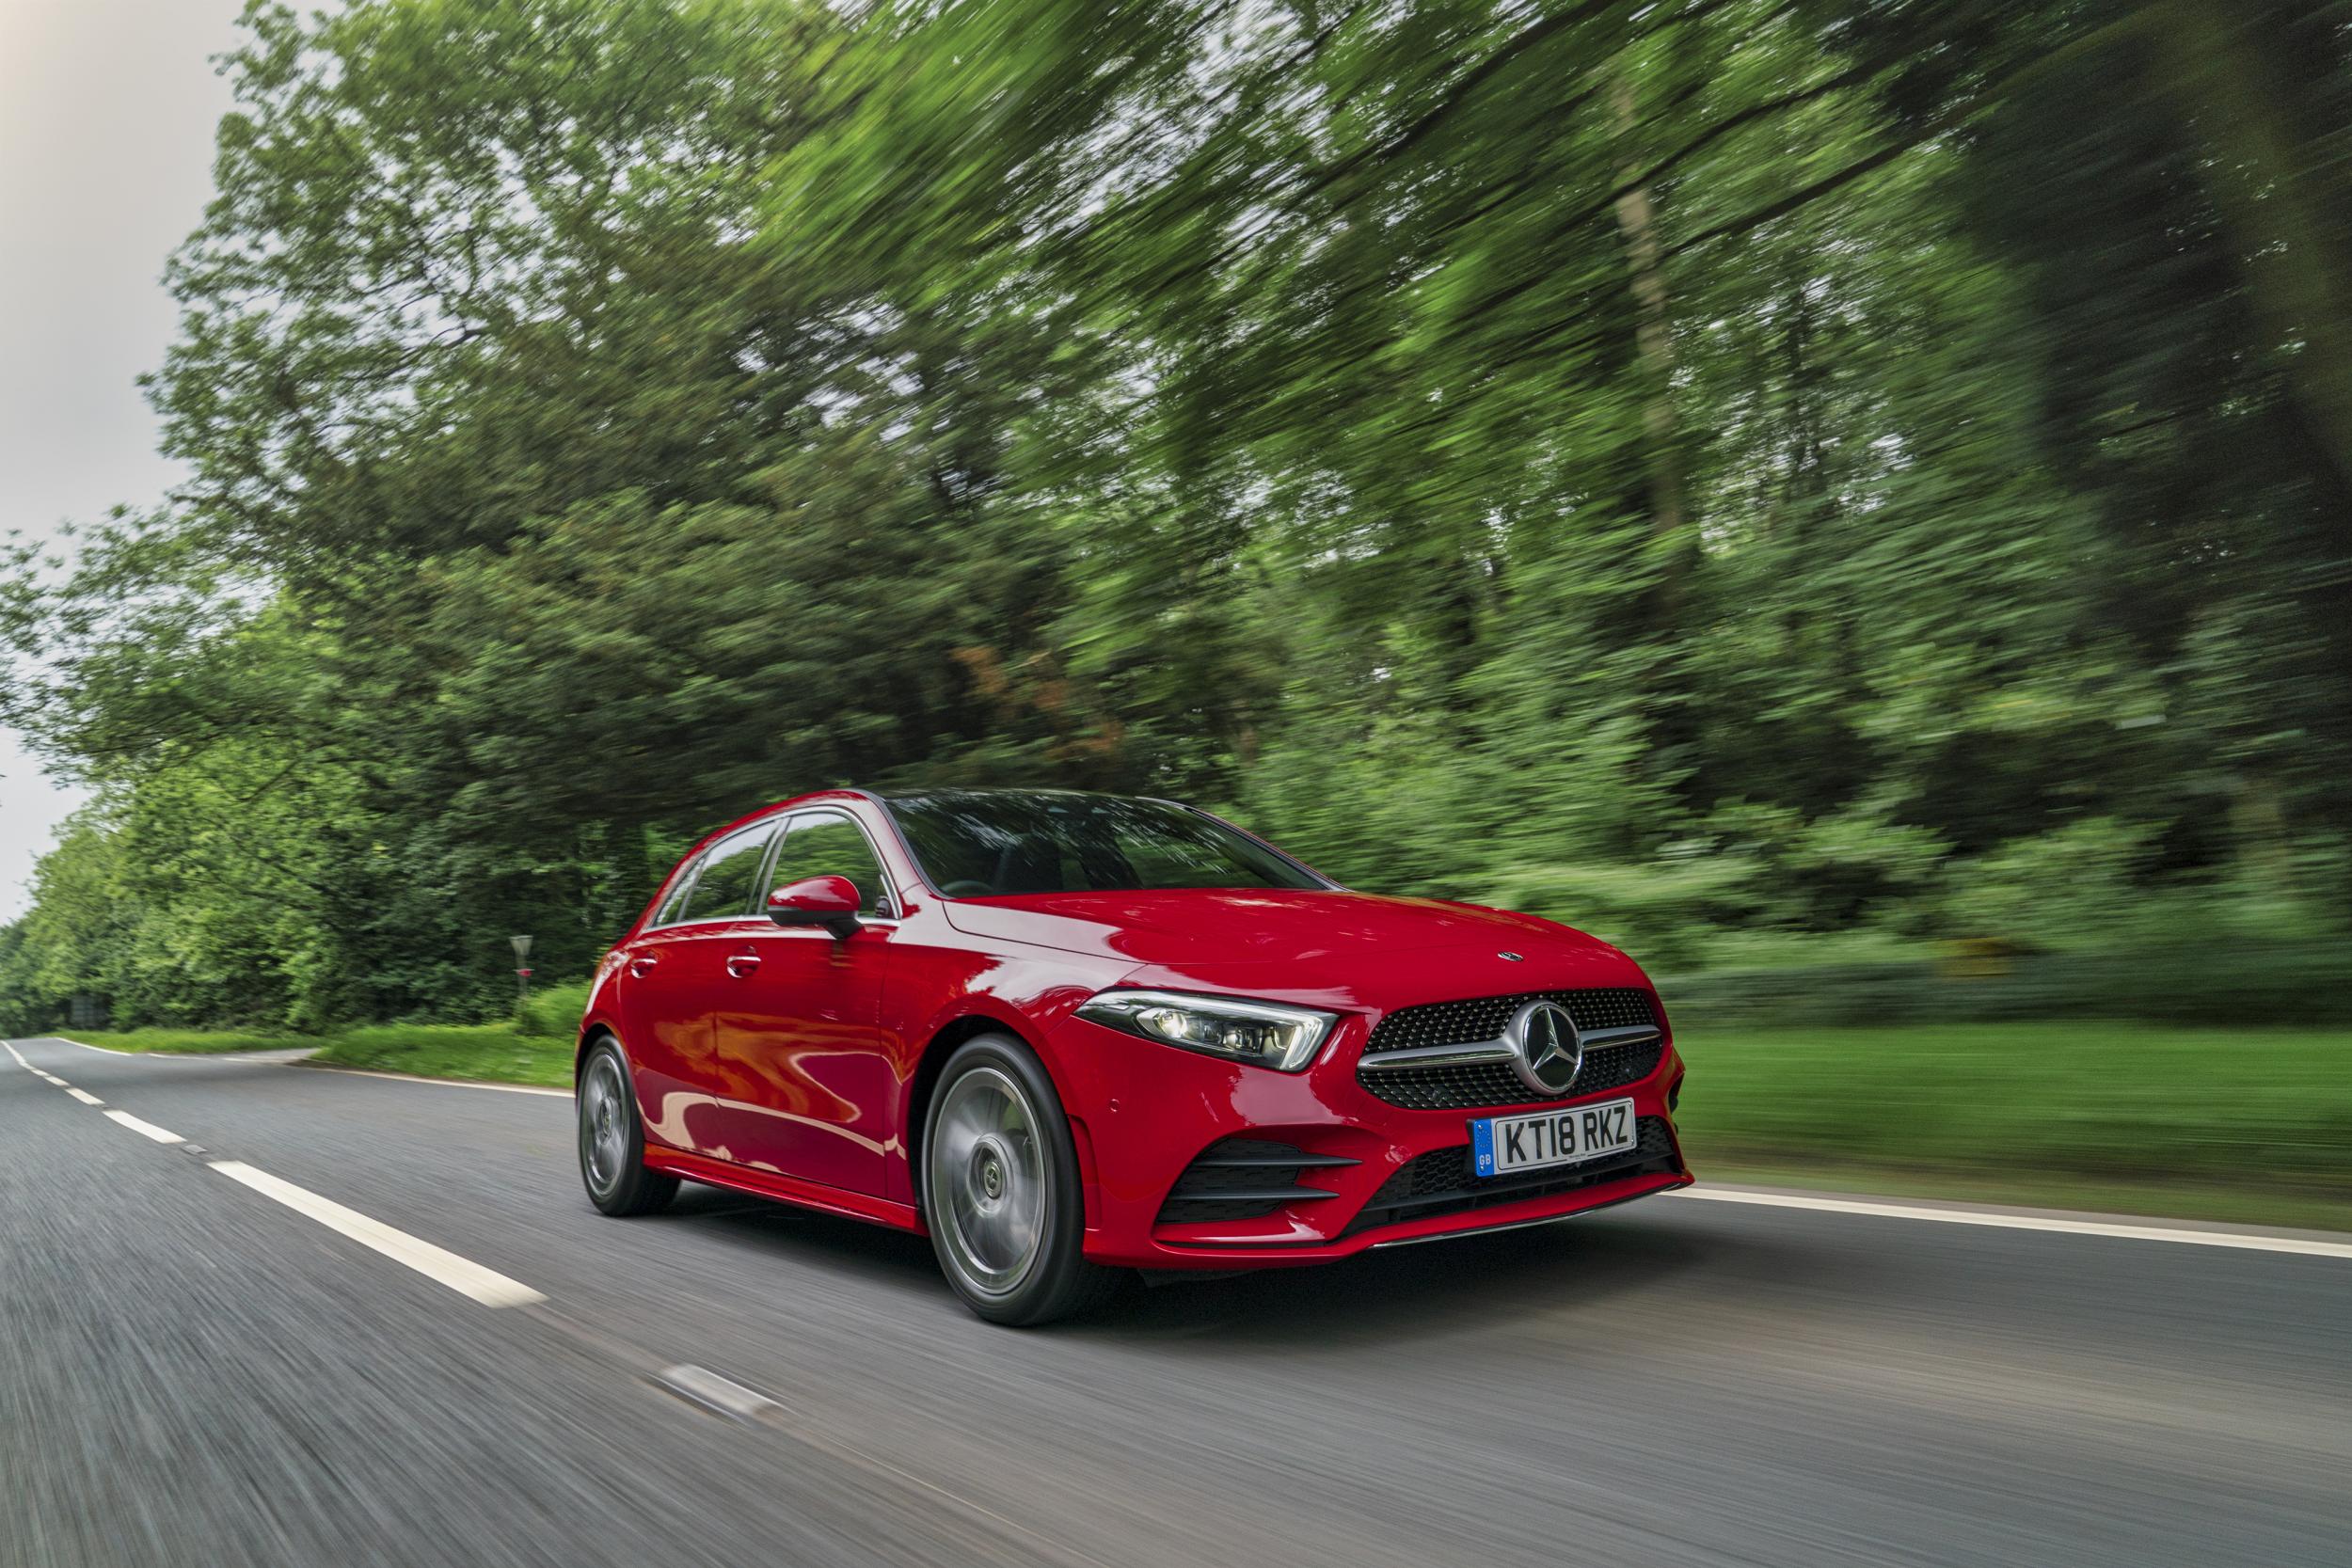 2018 saw an exceptional sales performance from the new A-Class